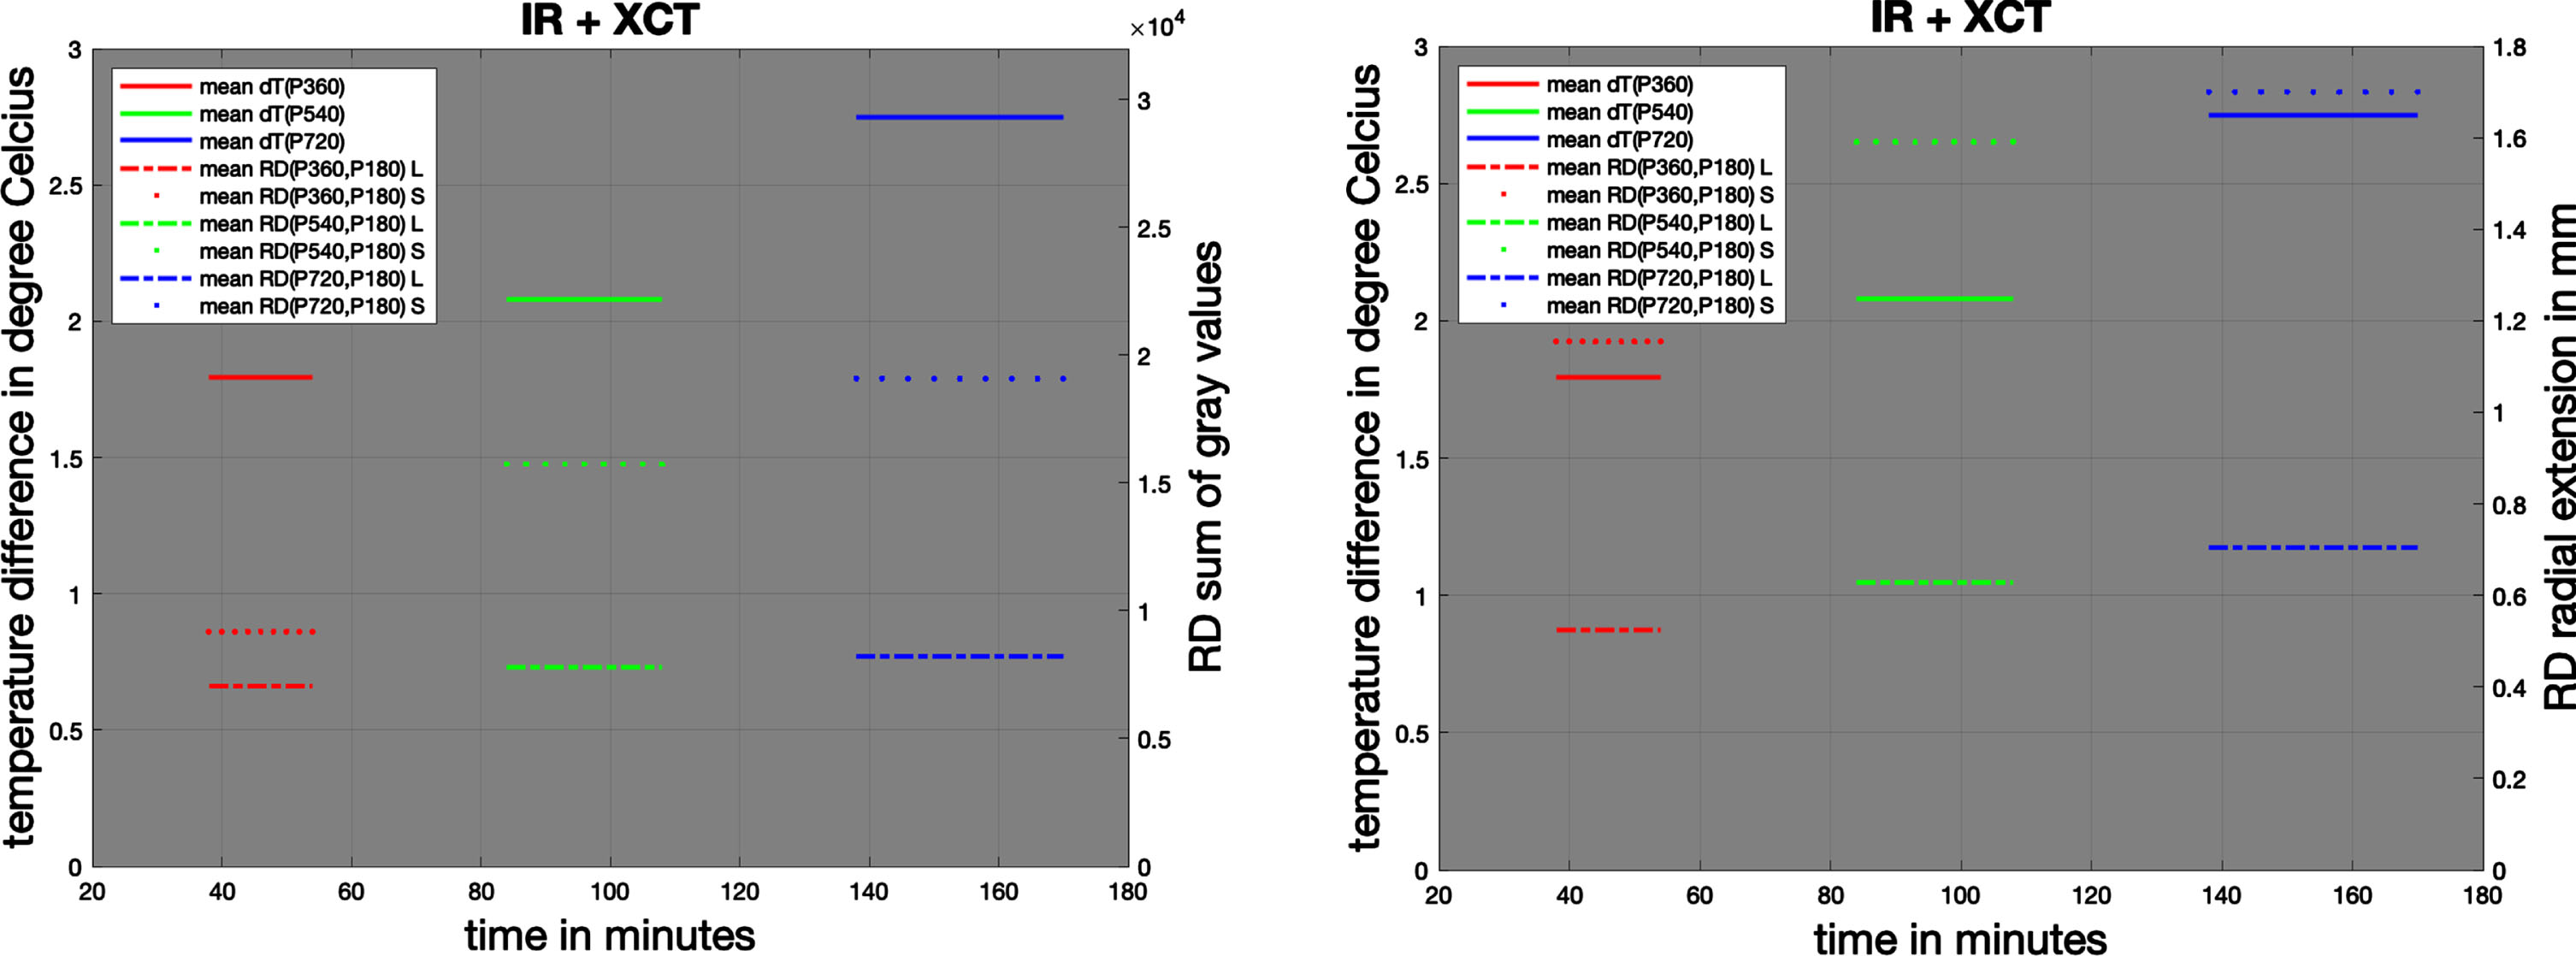 Mean temperature variations (left axis) vs. RD evaluation (right axis) for both spheres (large “L” and small “S”, respectively): sum of gray values (left) and radial extension in pixels (right).